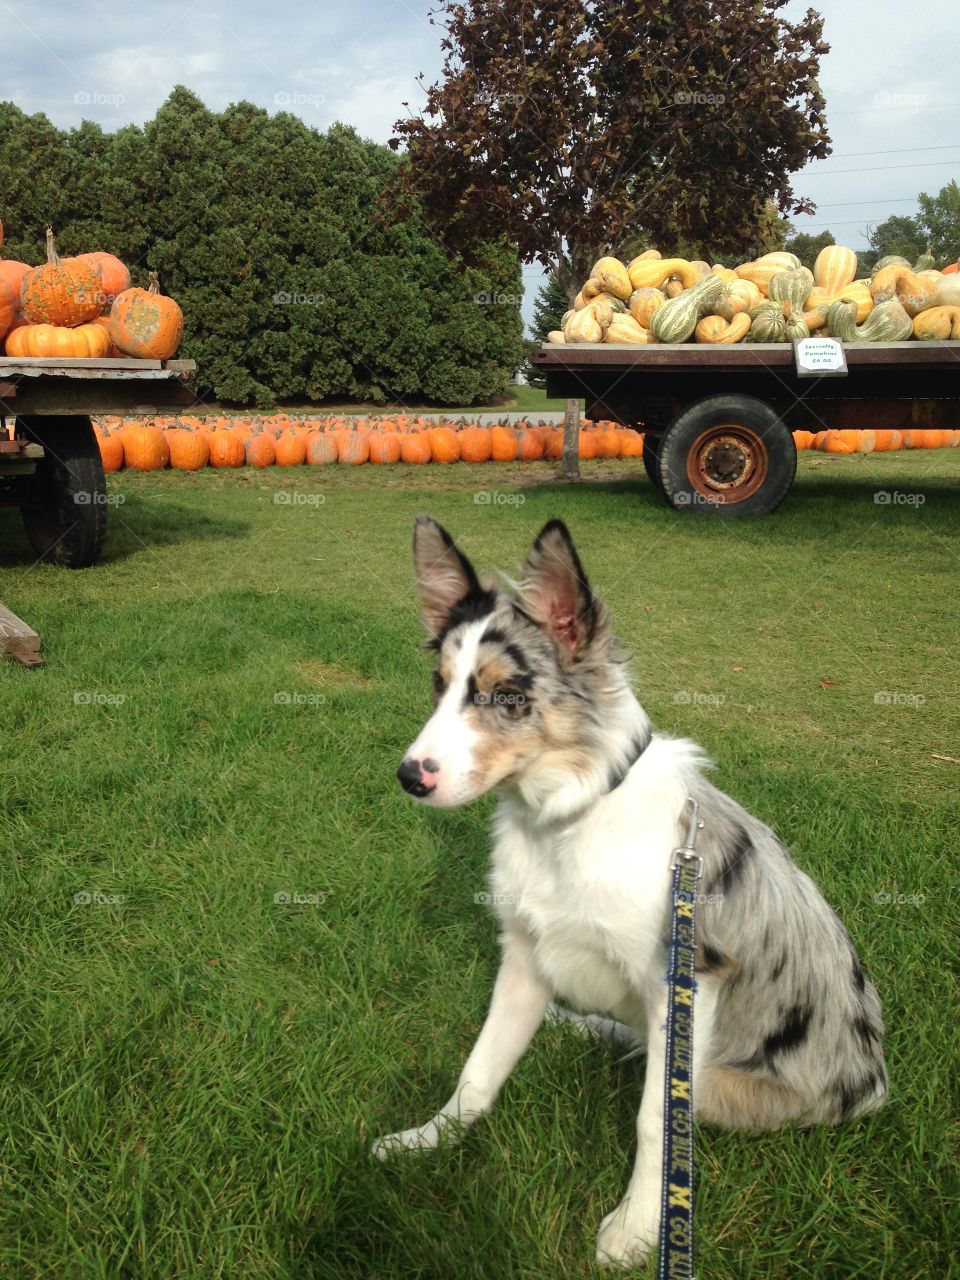 Trip to Johnsons Pumpkin Farm with my pup.